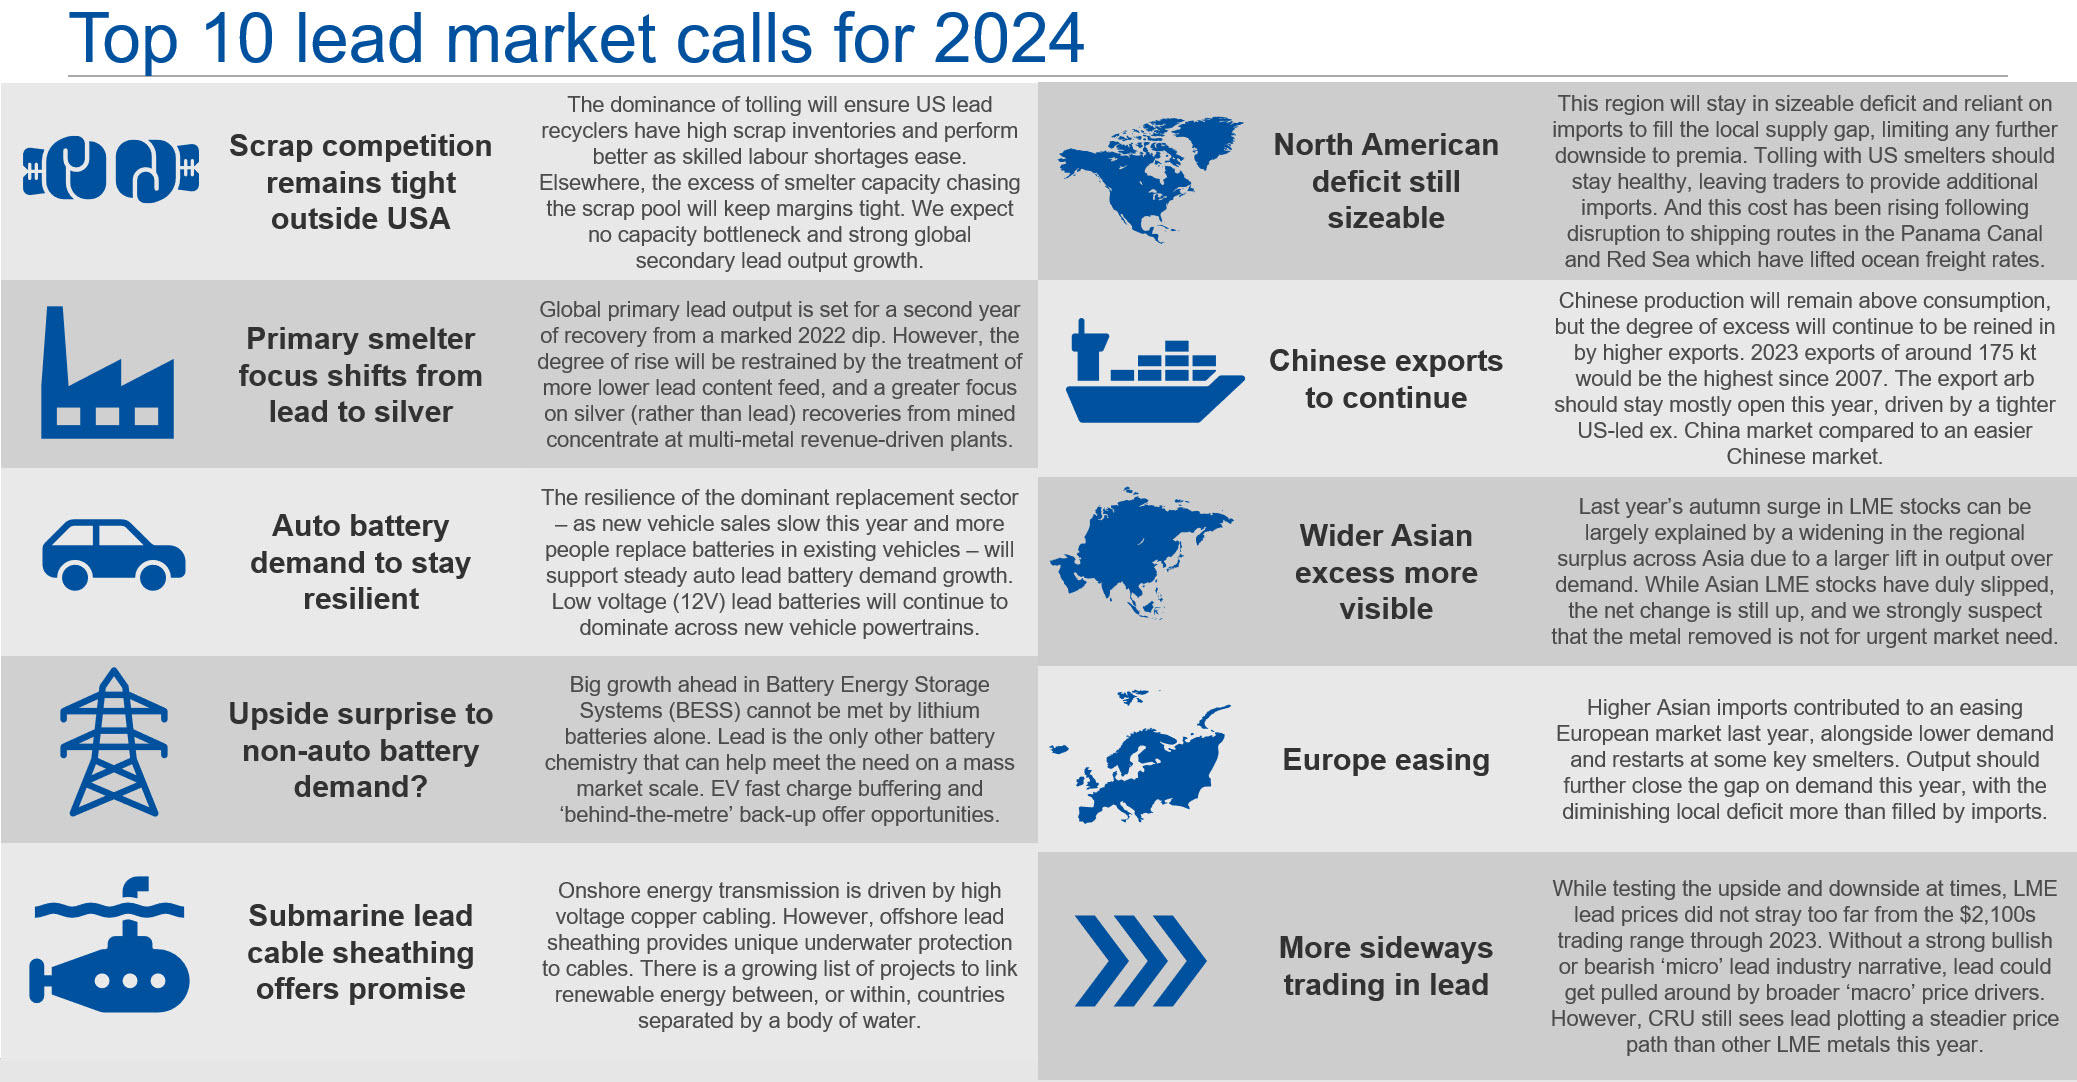 Table representing top ten calls for lead market in 2024